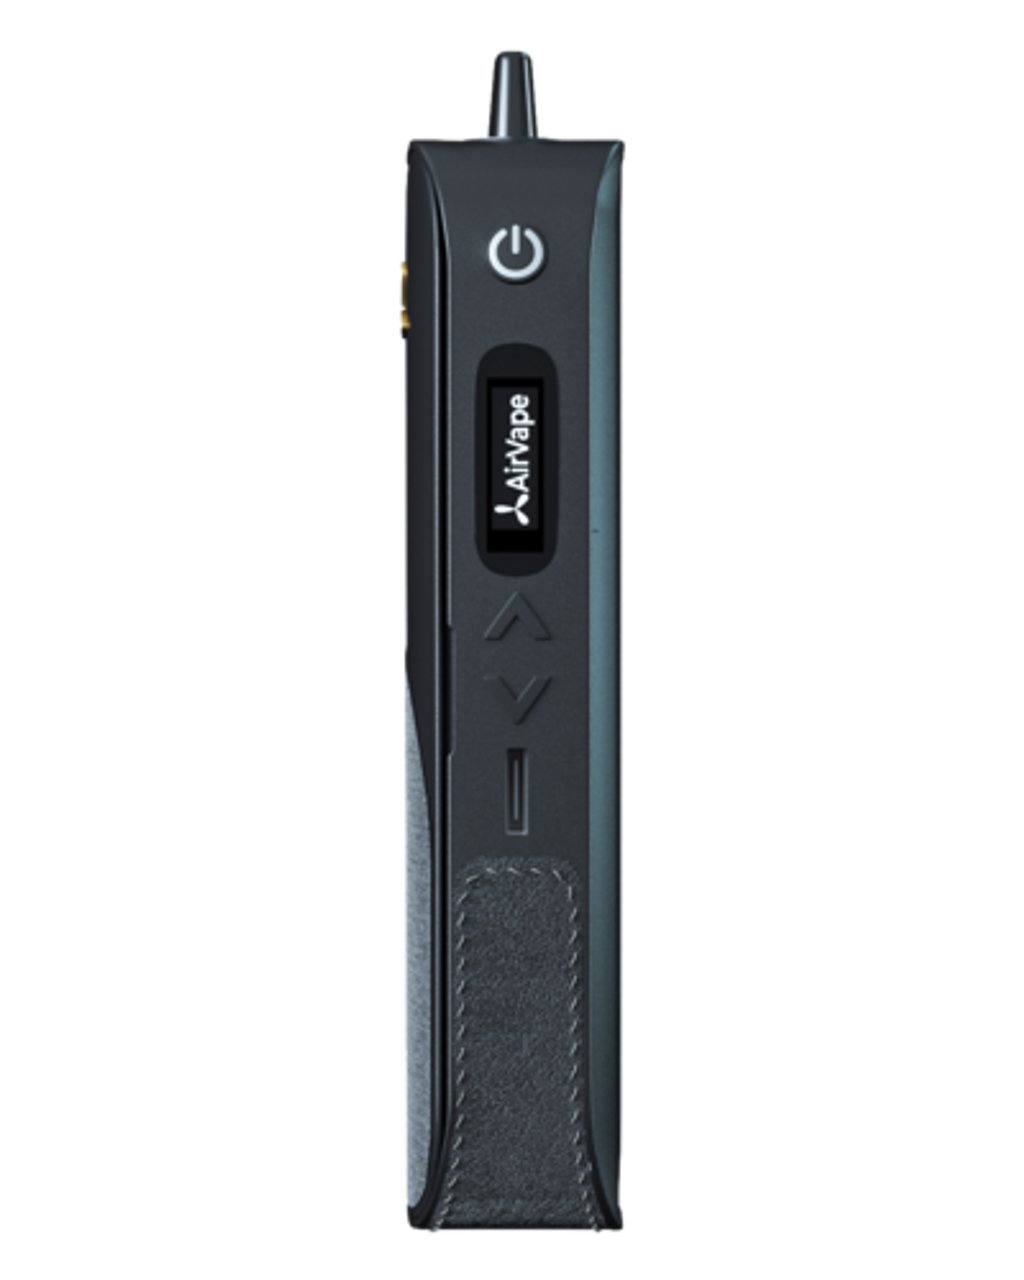 AirVape Legacy Portable Vaporizer in Black, Front View on Seamless White Background